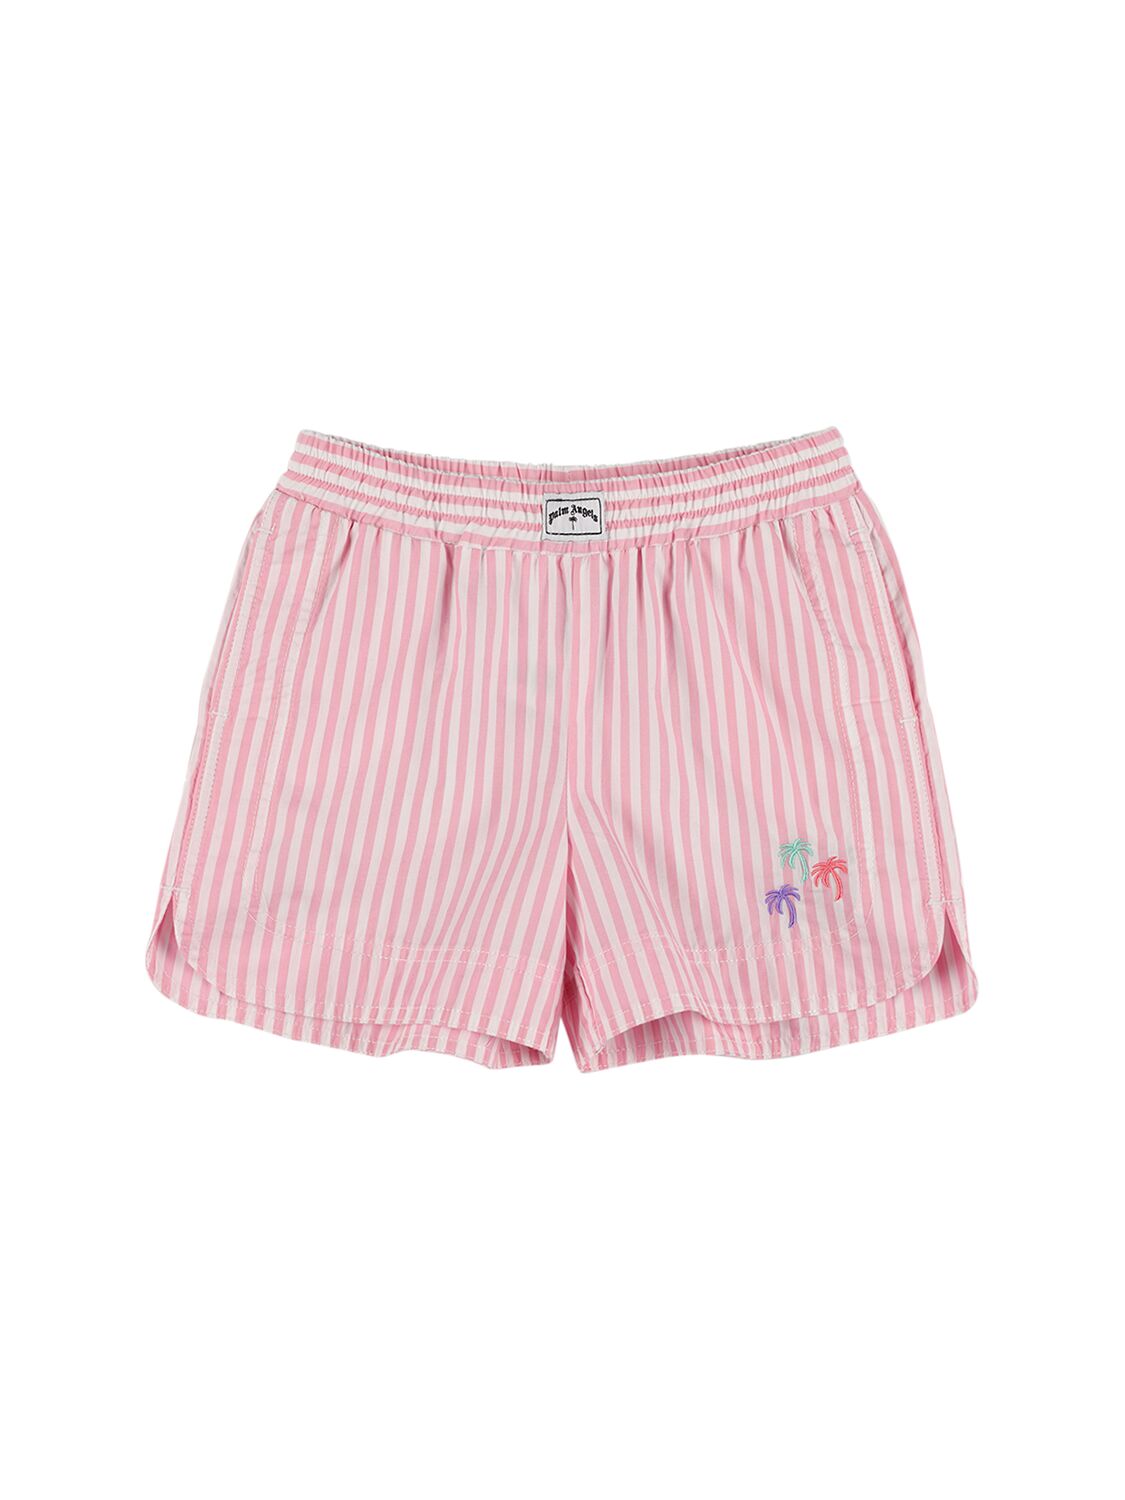 Image of 3 Palms Striped Cotton Boxer Shorts